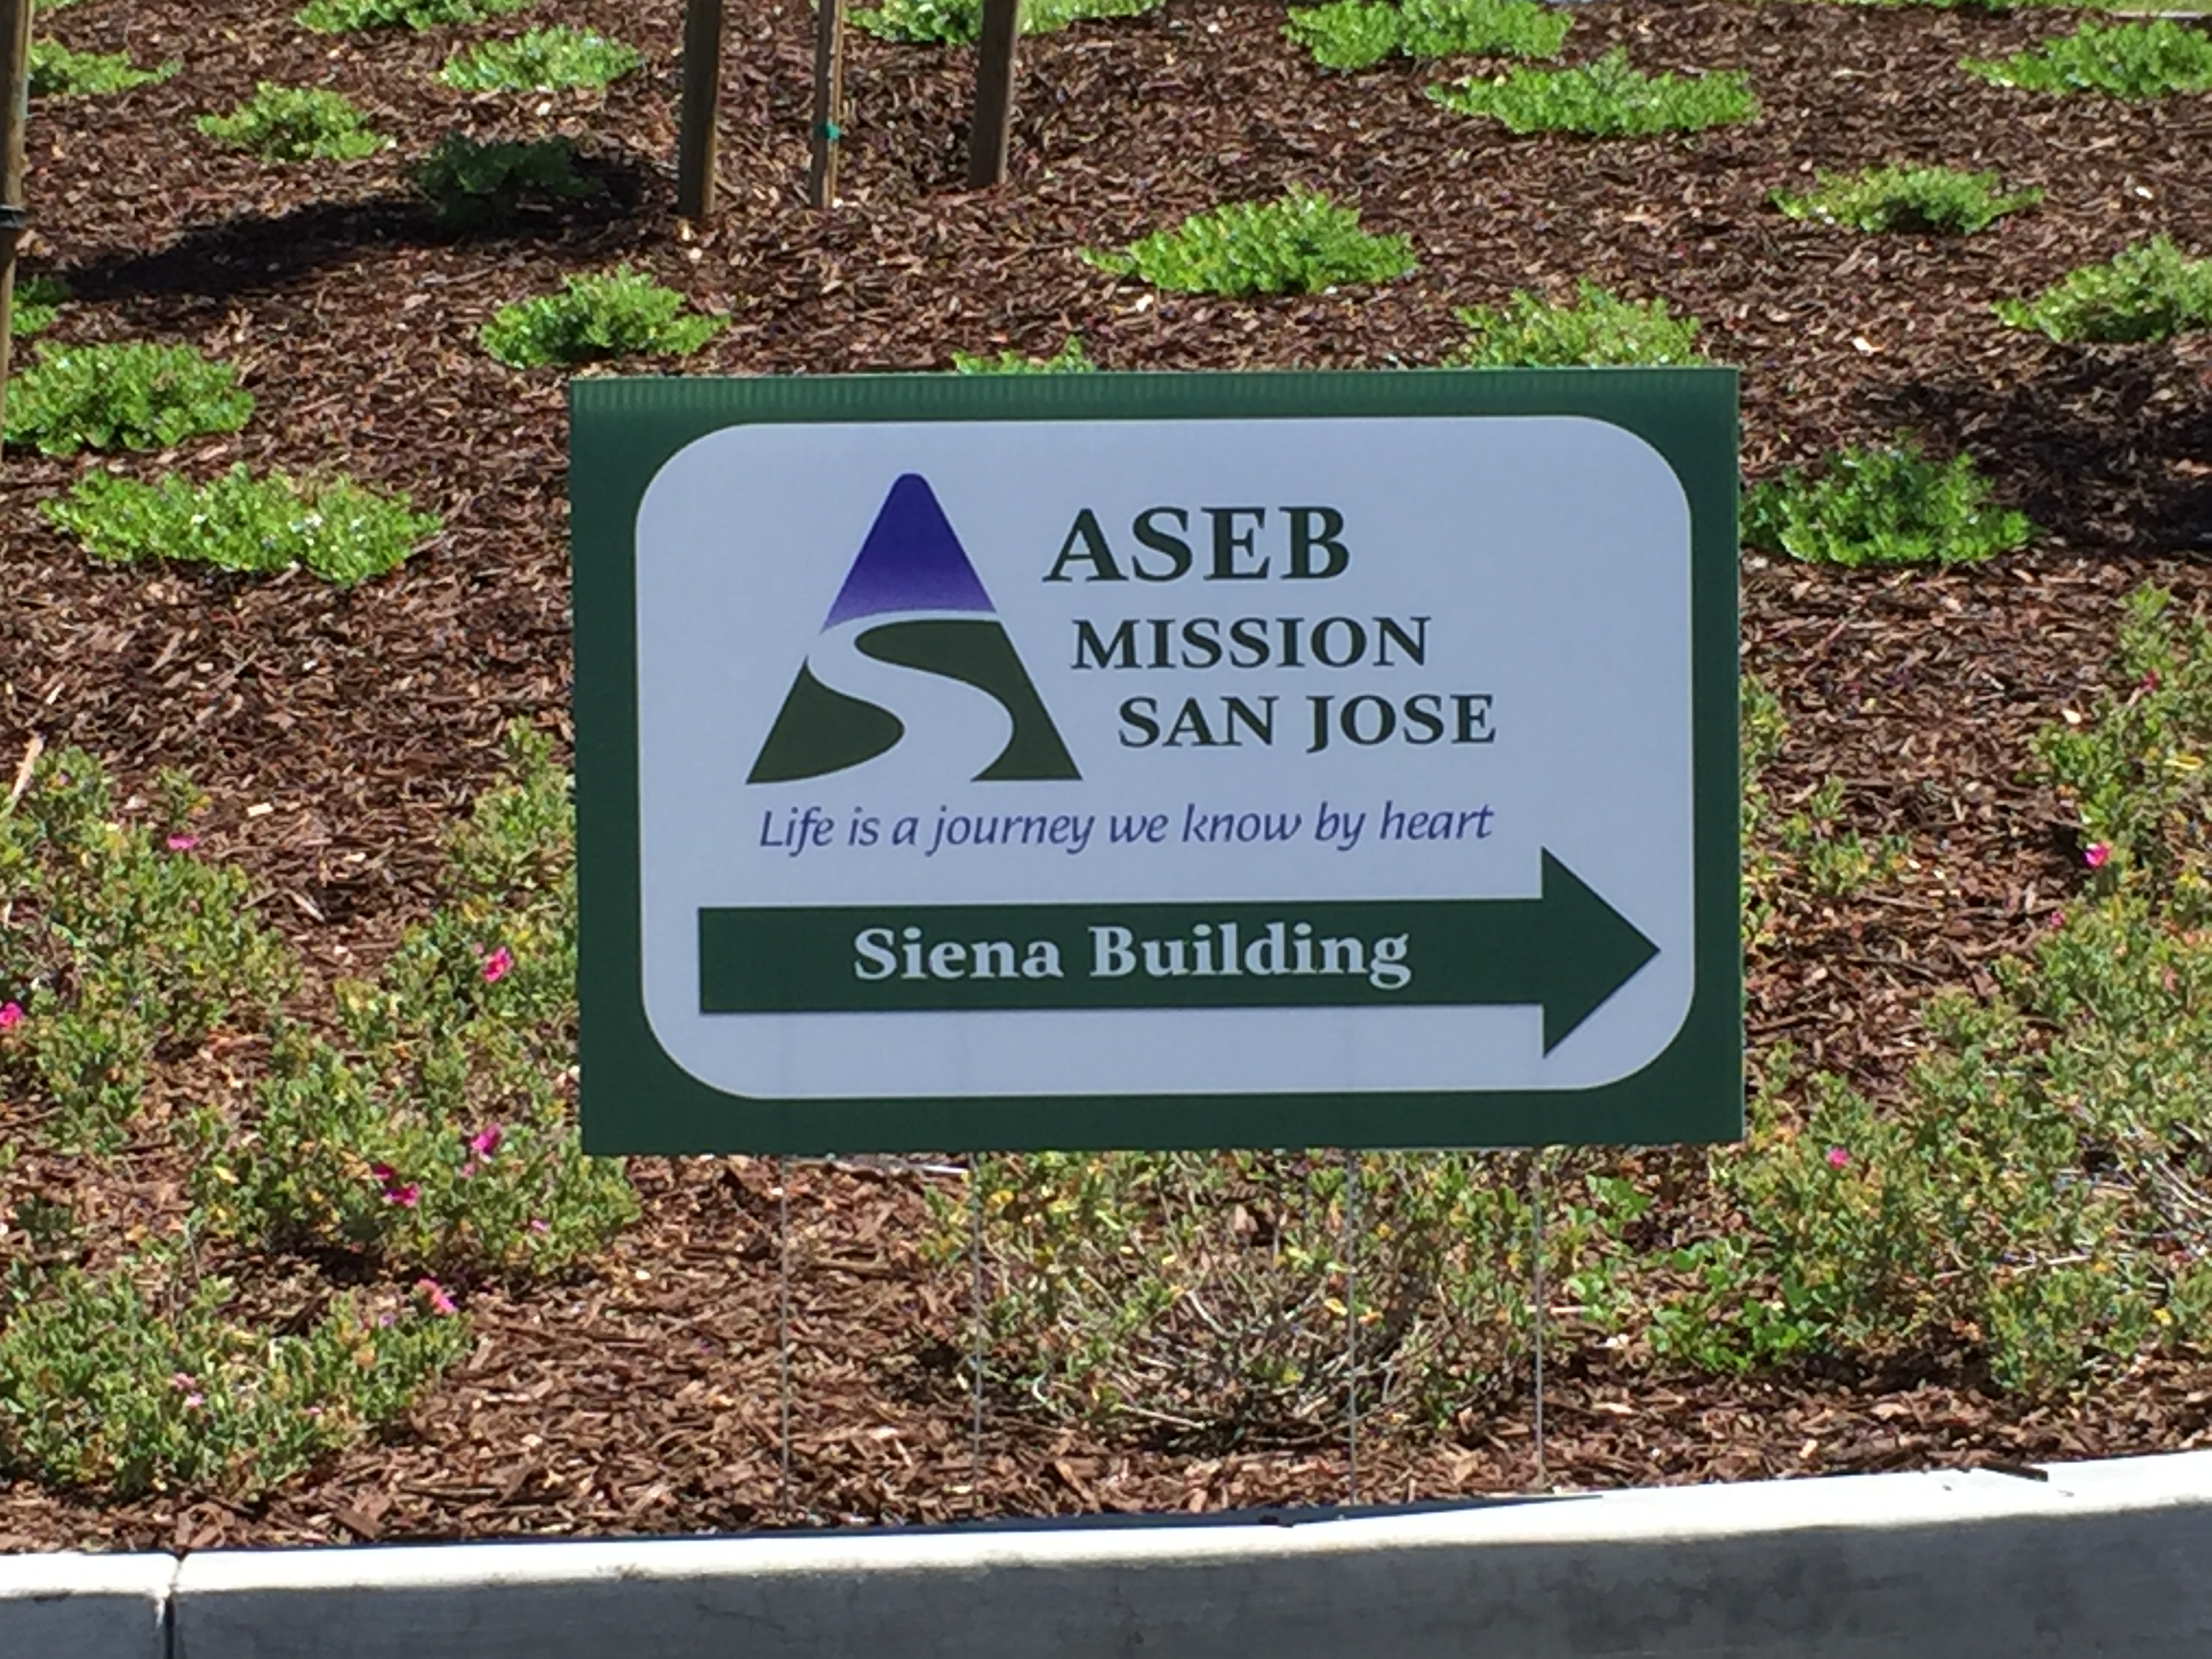 ASEB Mission San Jose is Open!